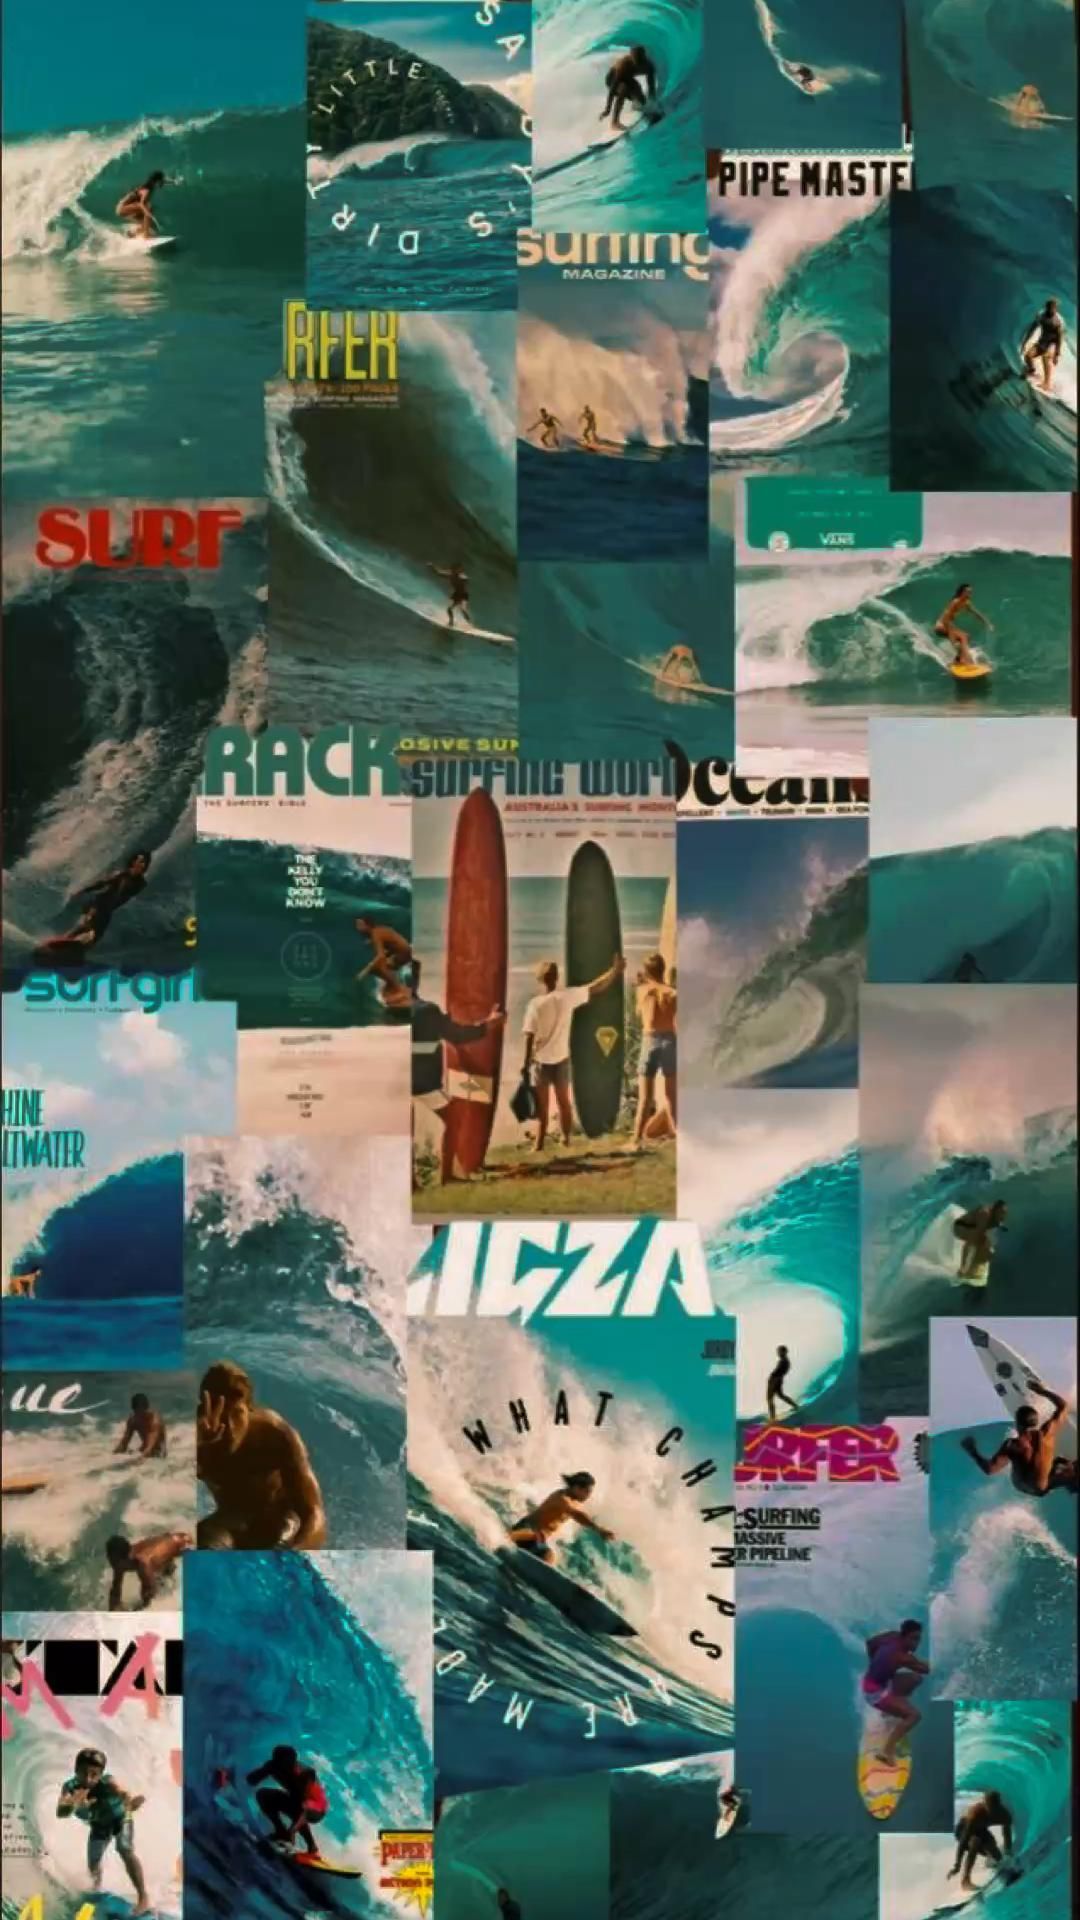 Surfing wallpaper for phone - Surf